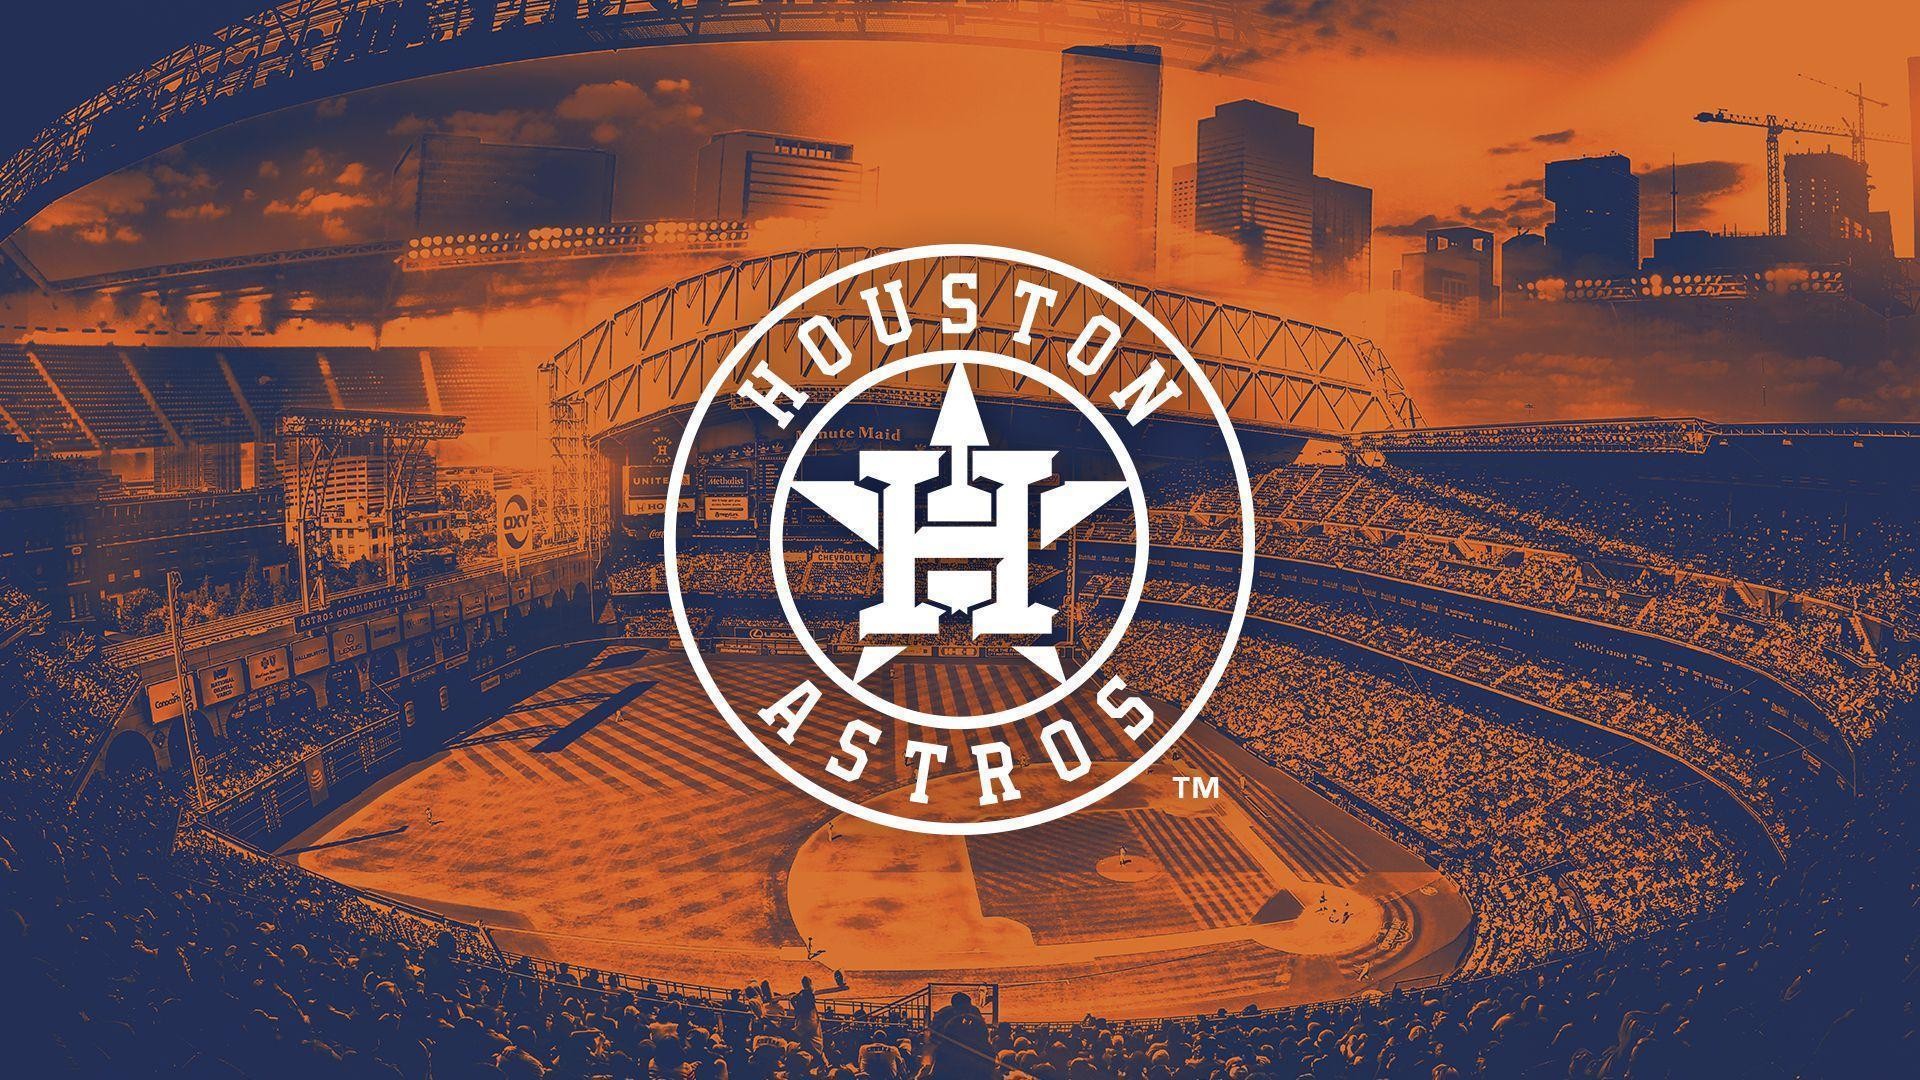 Houston Astros Wallpaper HD With high-resolution 1920X1080 pixel. You can use this wallpaper for Mac Desktop Wallpaper, Laptop Screensavers, Android Wallpapers, Tablet or iPhone Home Screen and another mobile phone device